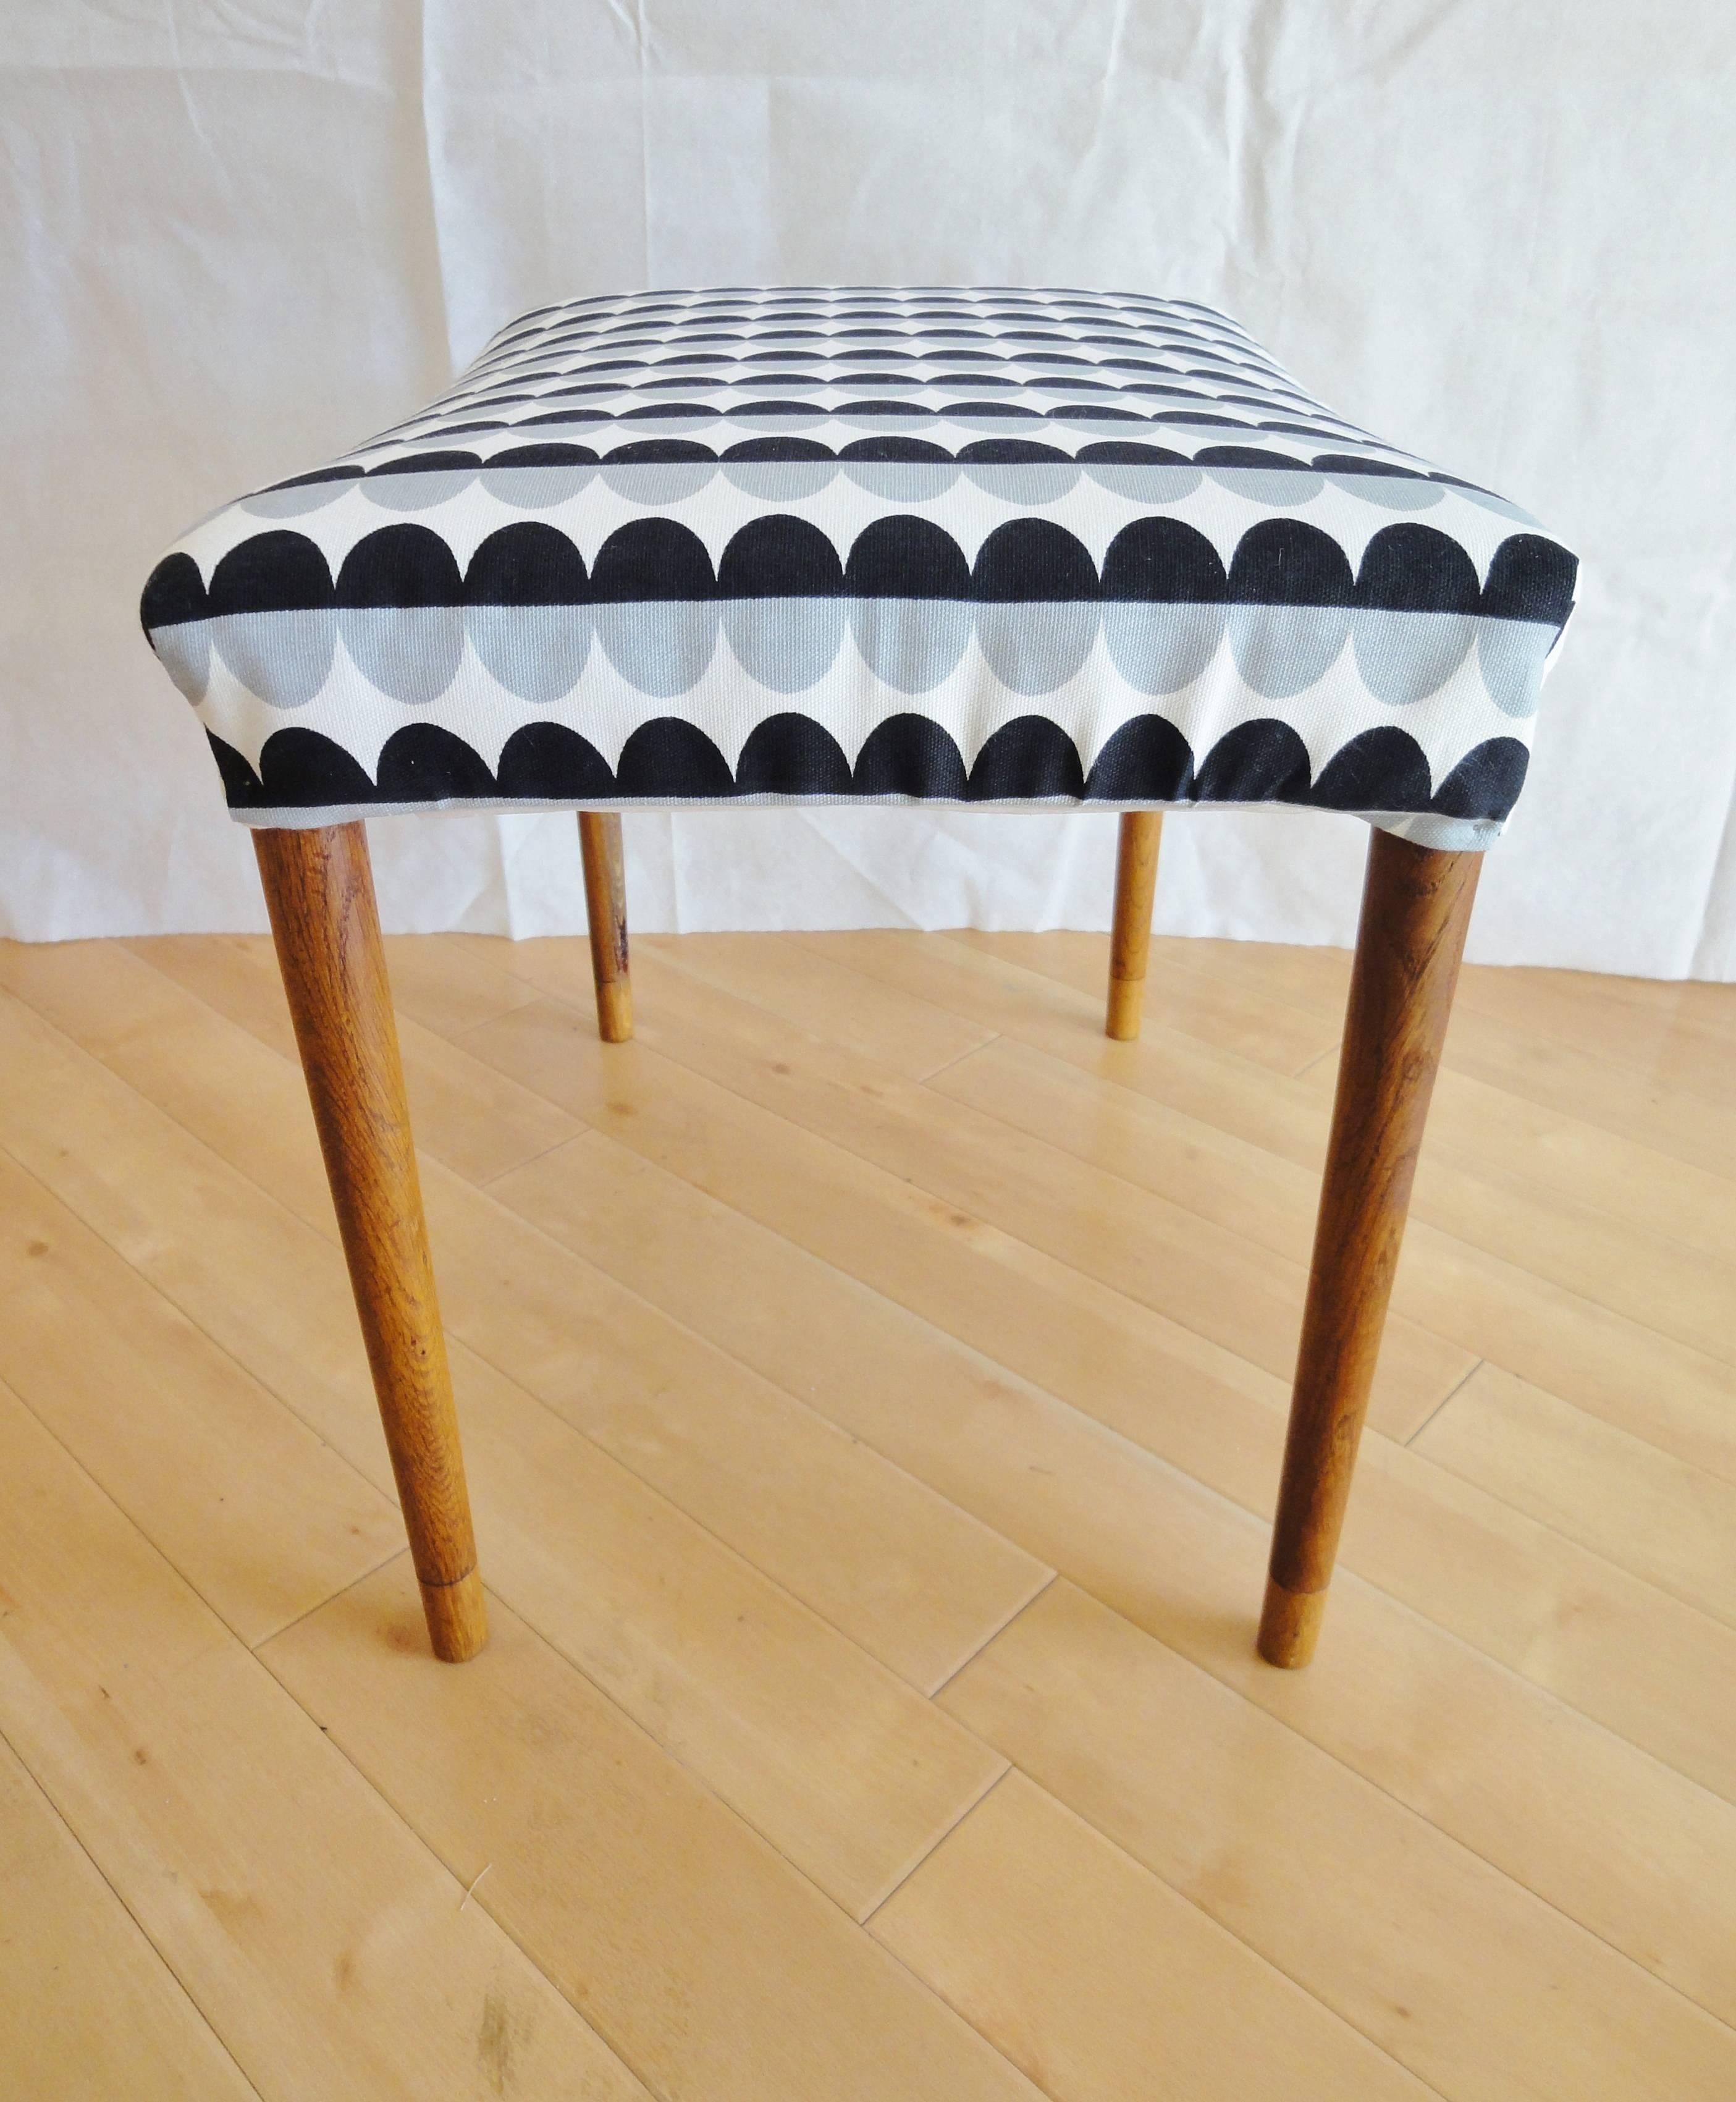 Designer: Finnish Design.

Manufacturer: Venesta.

Country: Finland.

Date: 1960s.

Material: Teak legs and frame with patterned heavy cotton upholstery

Maximum Dimensions: Width 50 cm, depth 35 cm and height 42 cm

Condition: Excellent